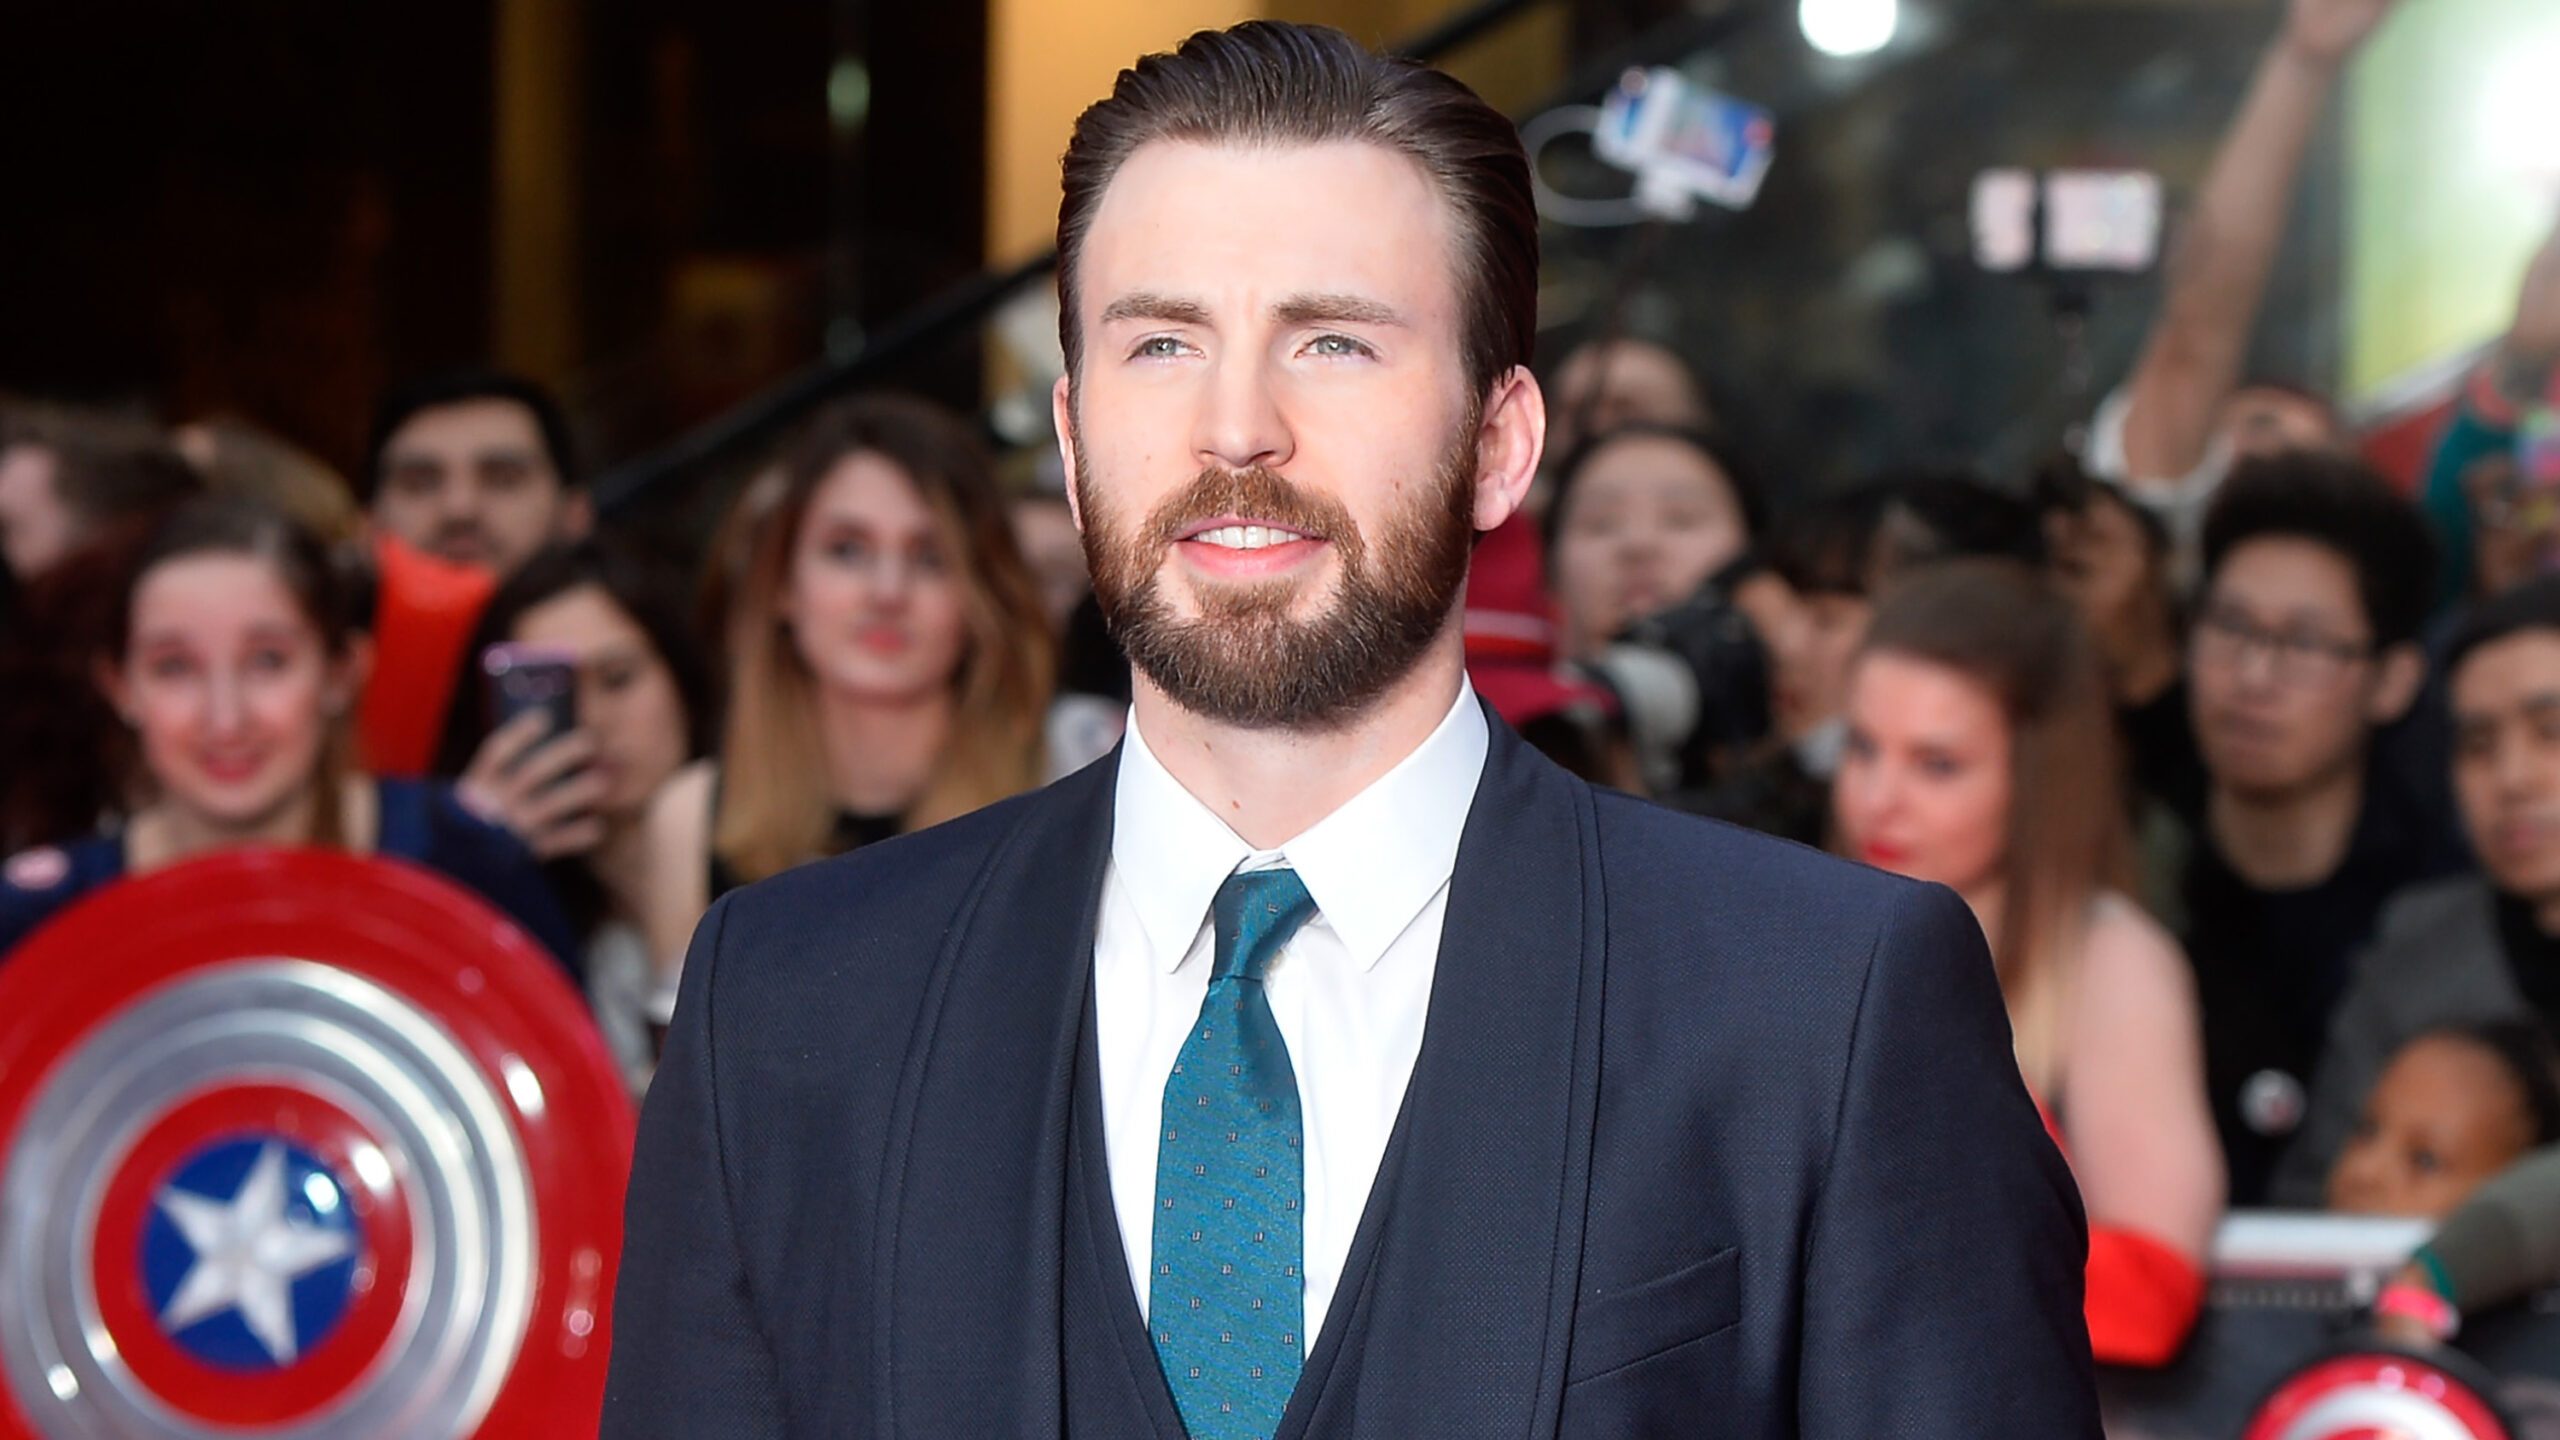 Here’s Chris Evans internship cover letter from when he was 16